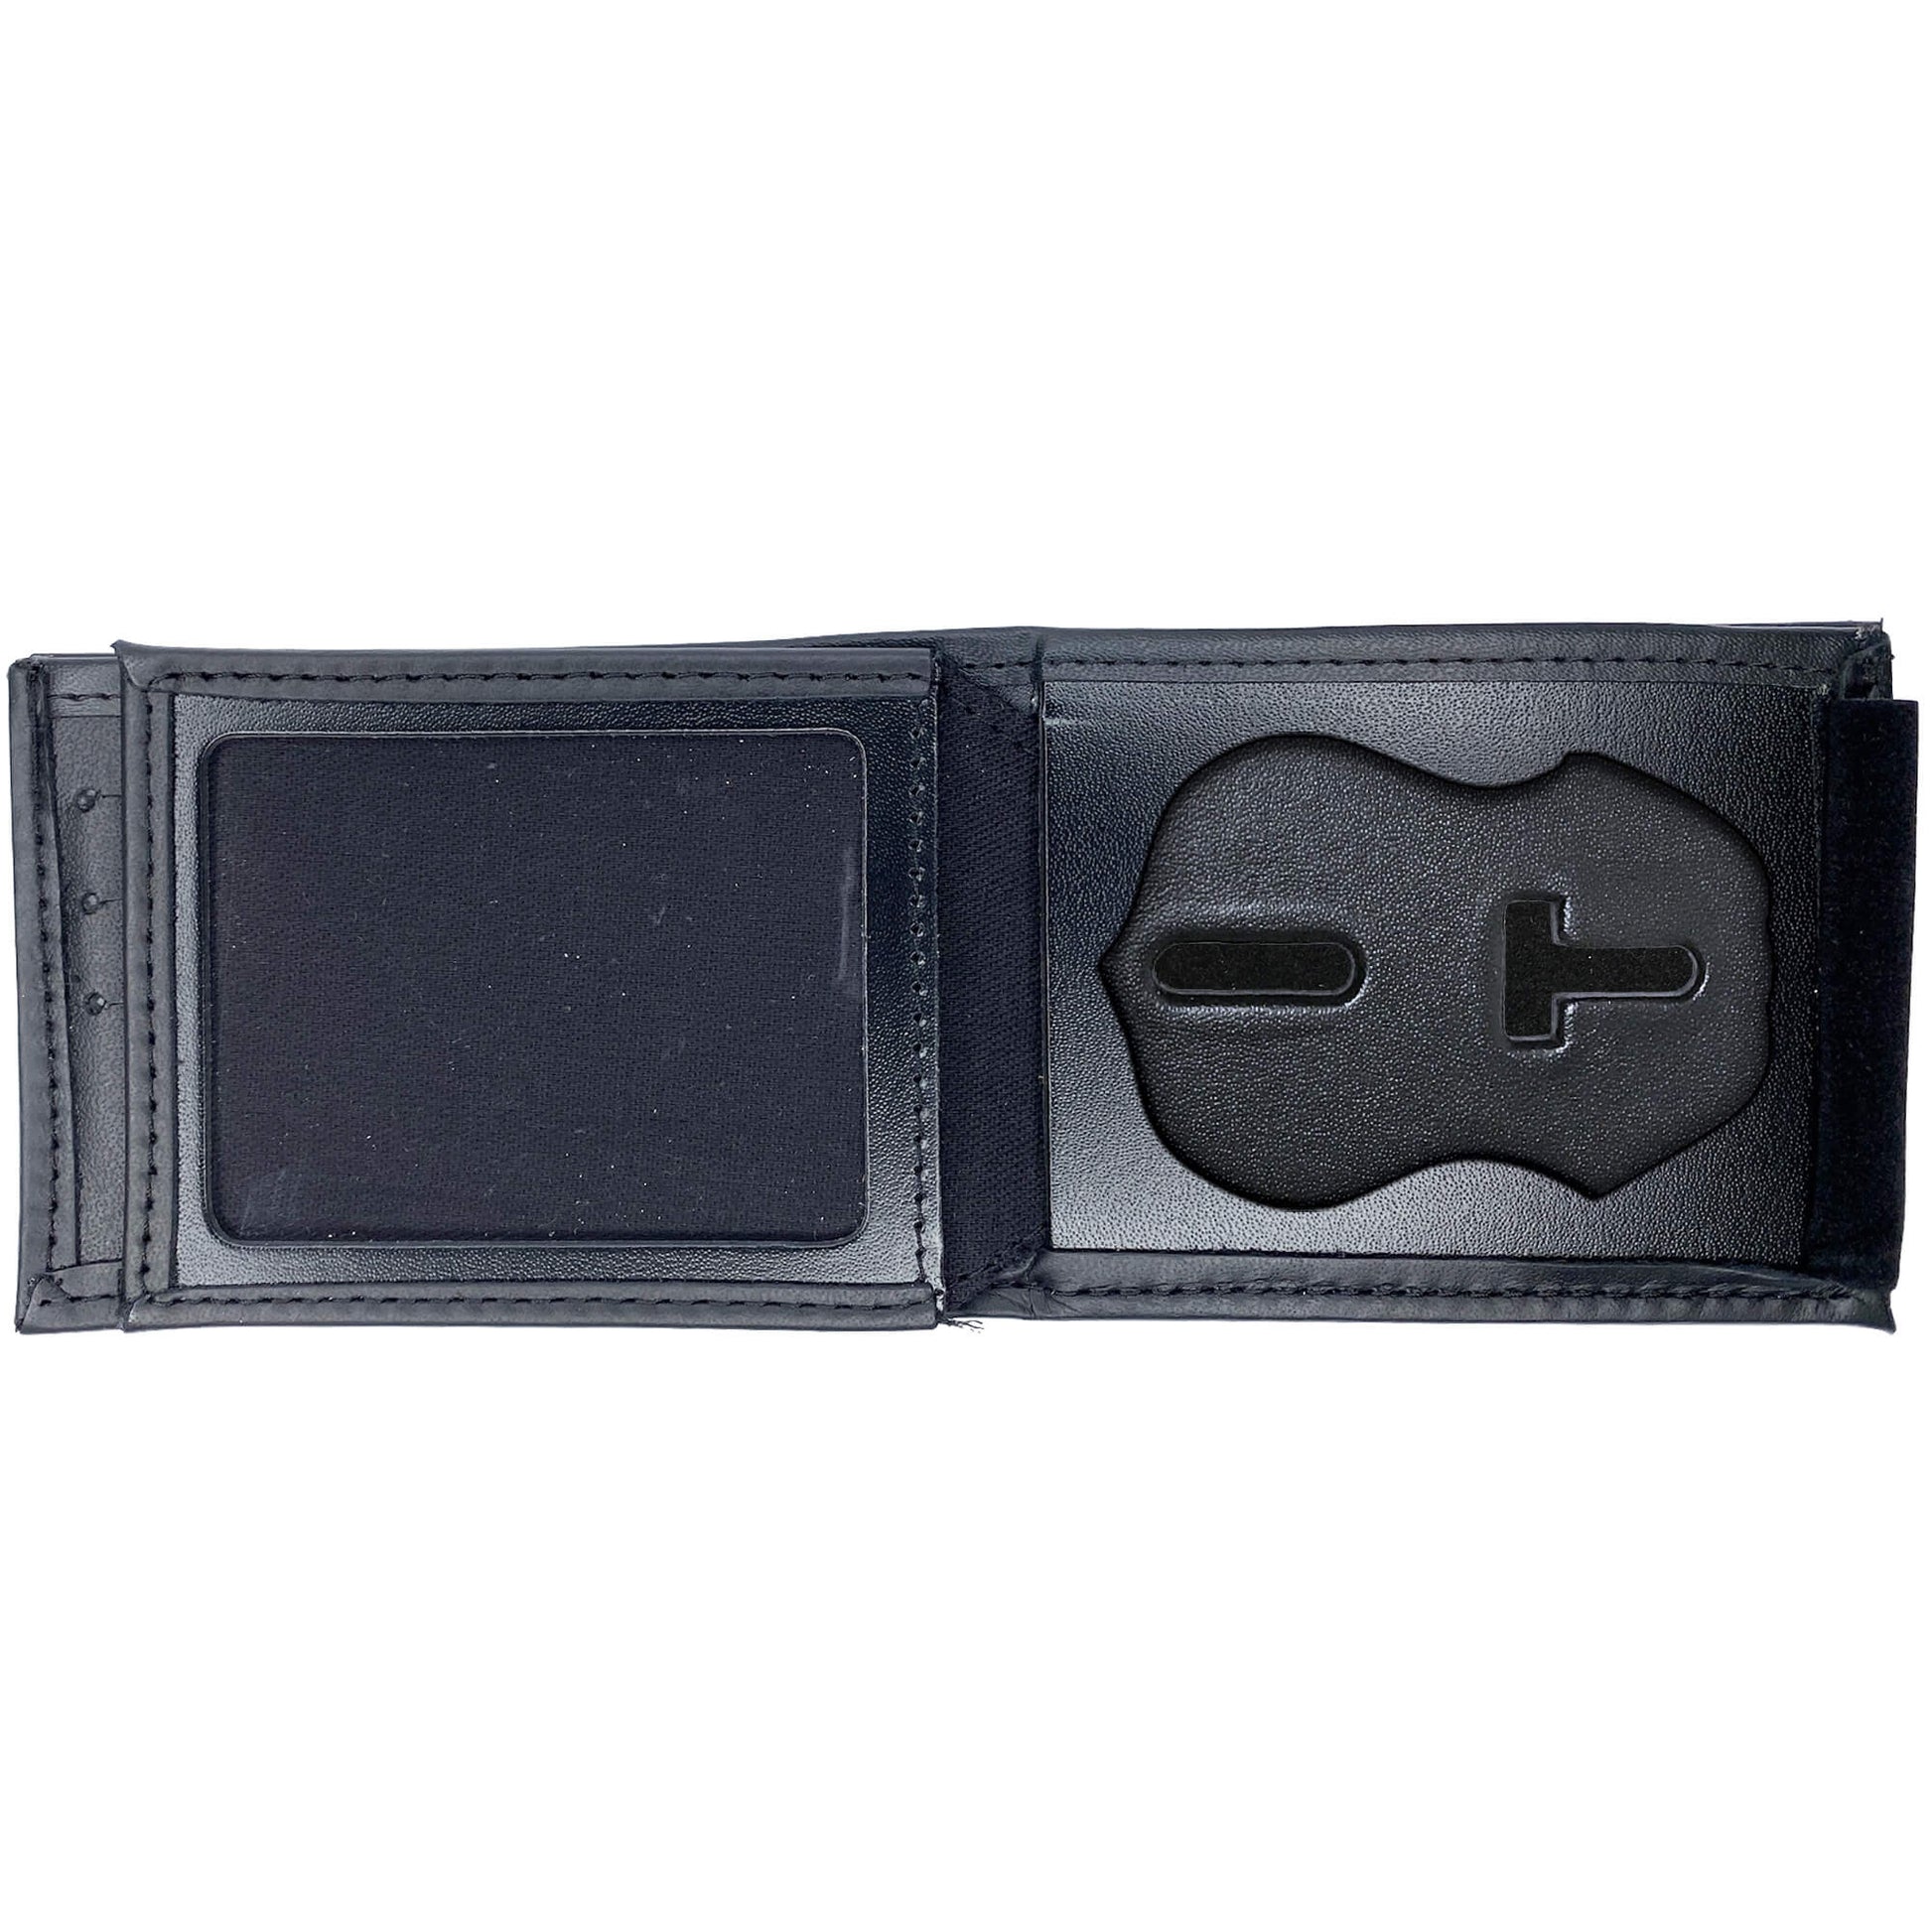 U.S. Federal Protective Service - FPS (3in) Horizontal Bifold Hidden Badge Wallet-Perfect Fit-911 Duty Gear USA